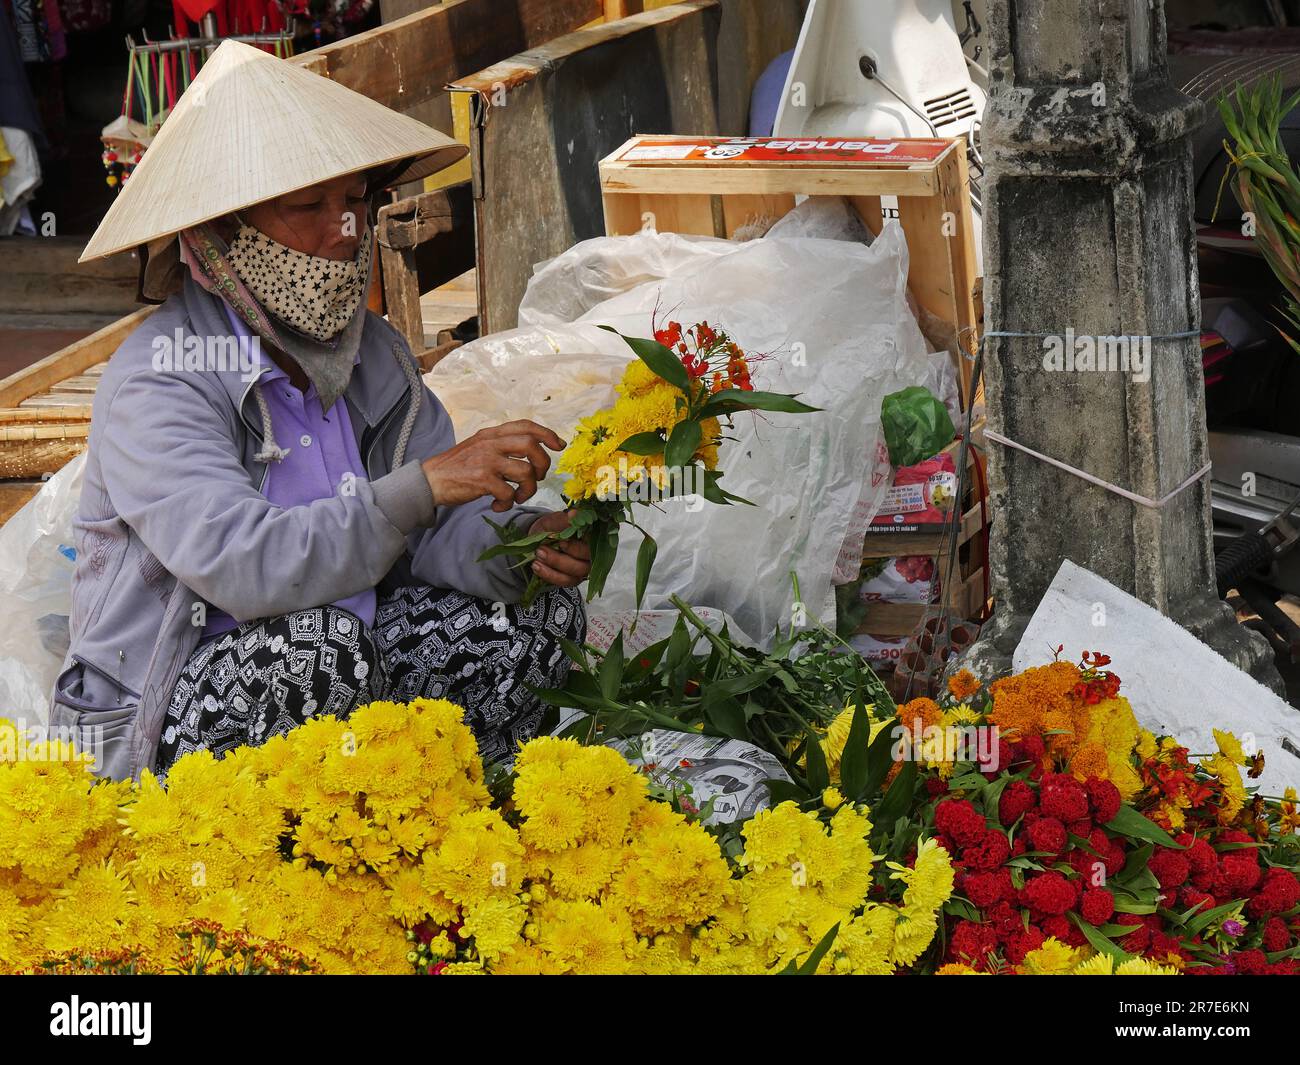 Vietnam, Quang Nam Province, Hoi An City, Old City listed at World Heritage site by Unesco, the Market, Woman selling Flowers Stock Photo